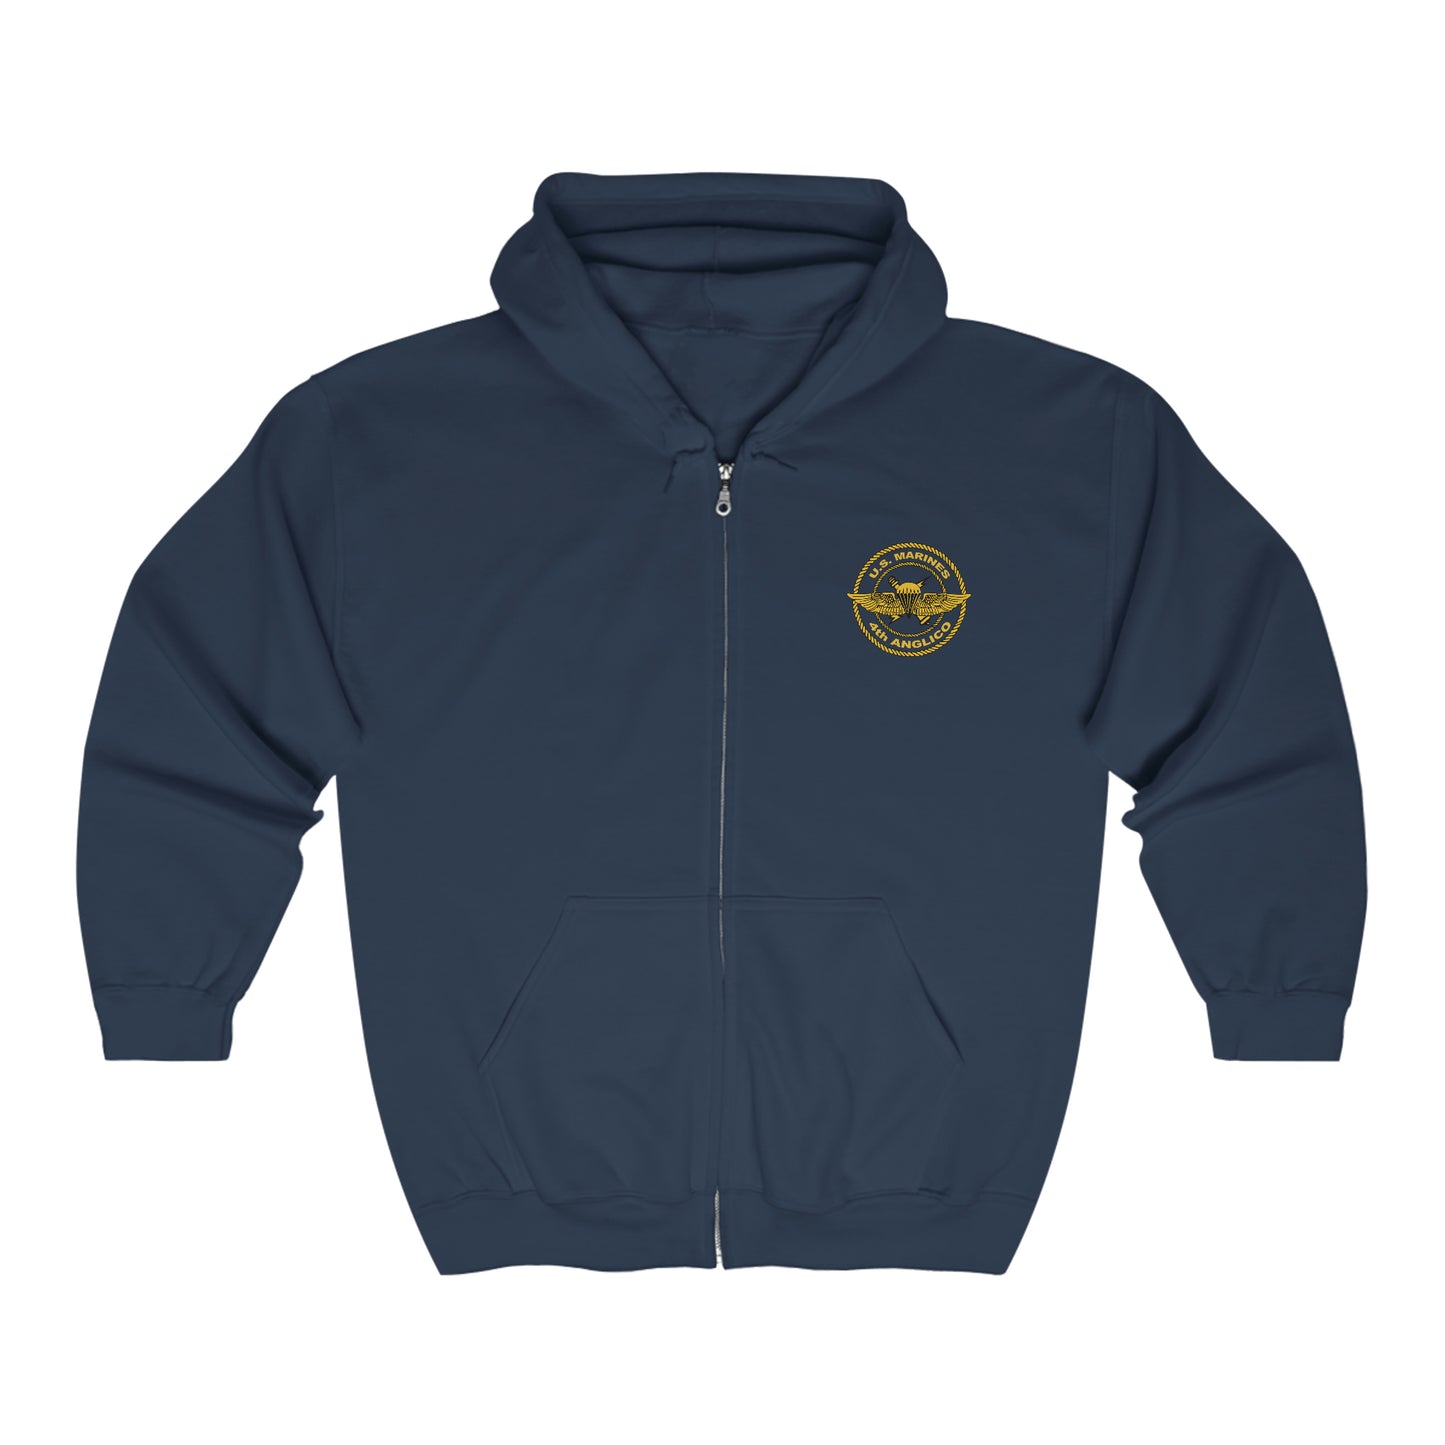 Navy Blue 4th ANGLICO Zip Hoodie